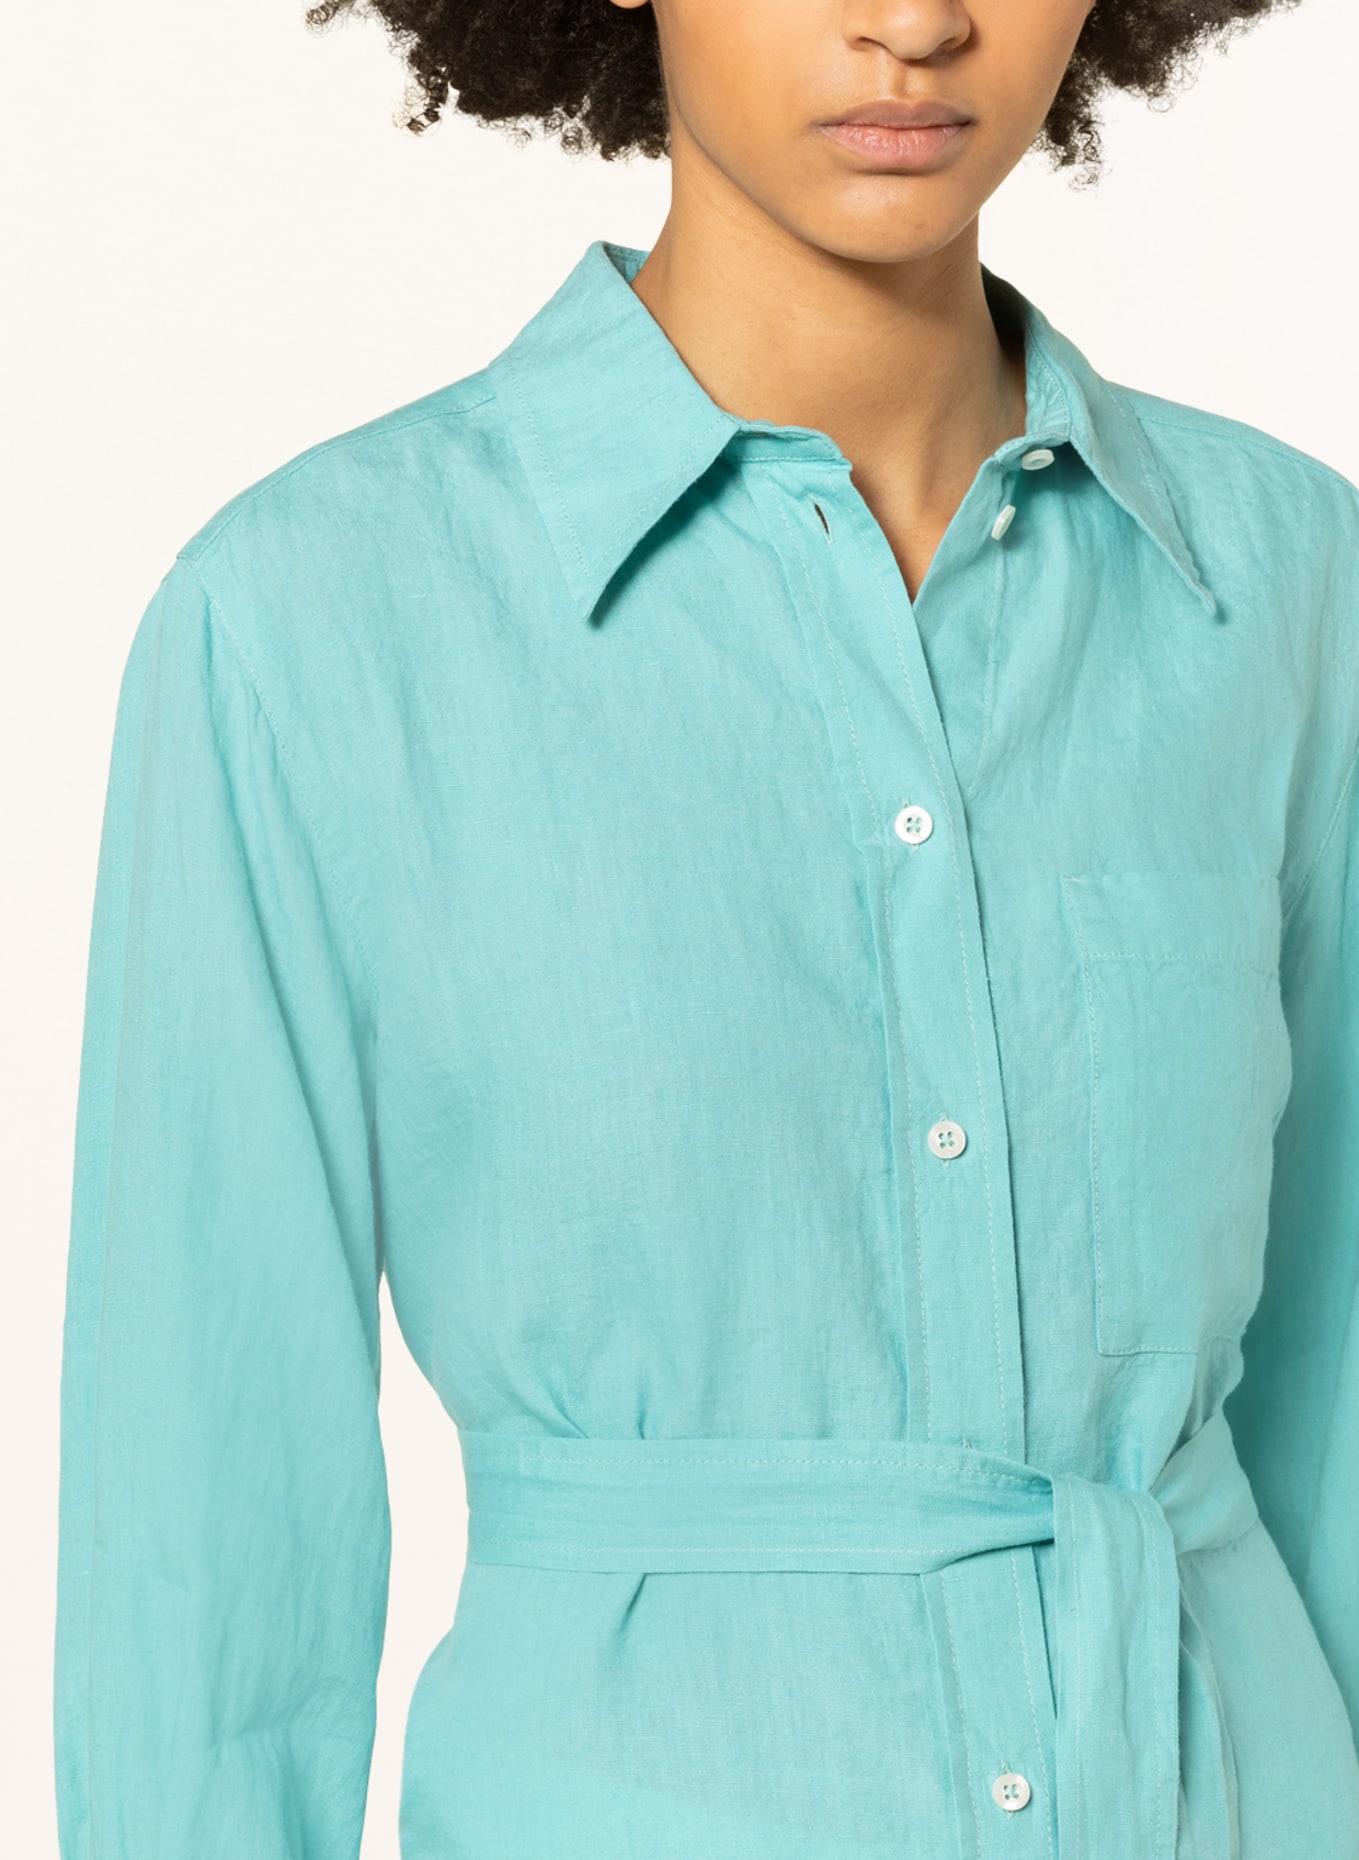 Marc O'Polo Shirt blouse made of linen , Color: TURQUOISE (Image 4)